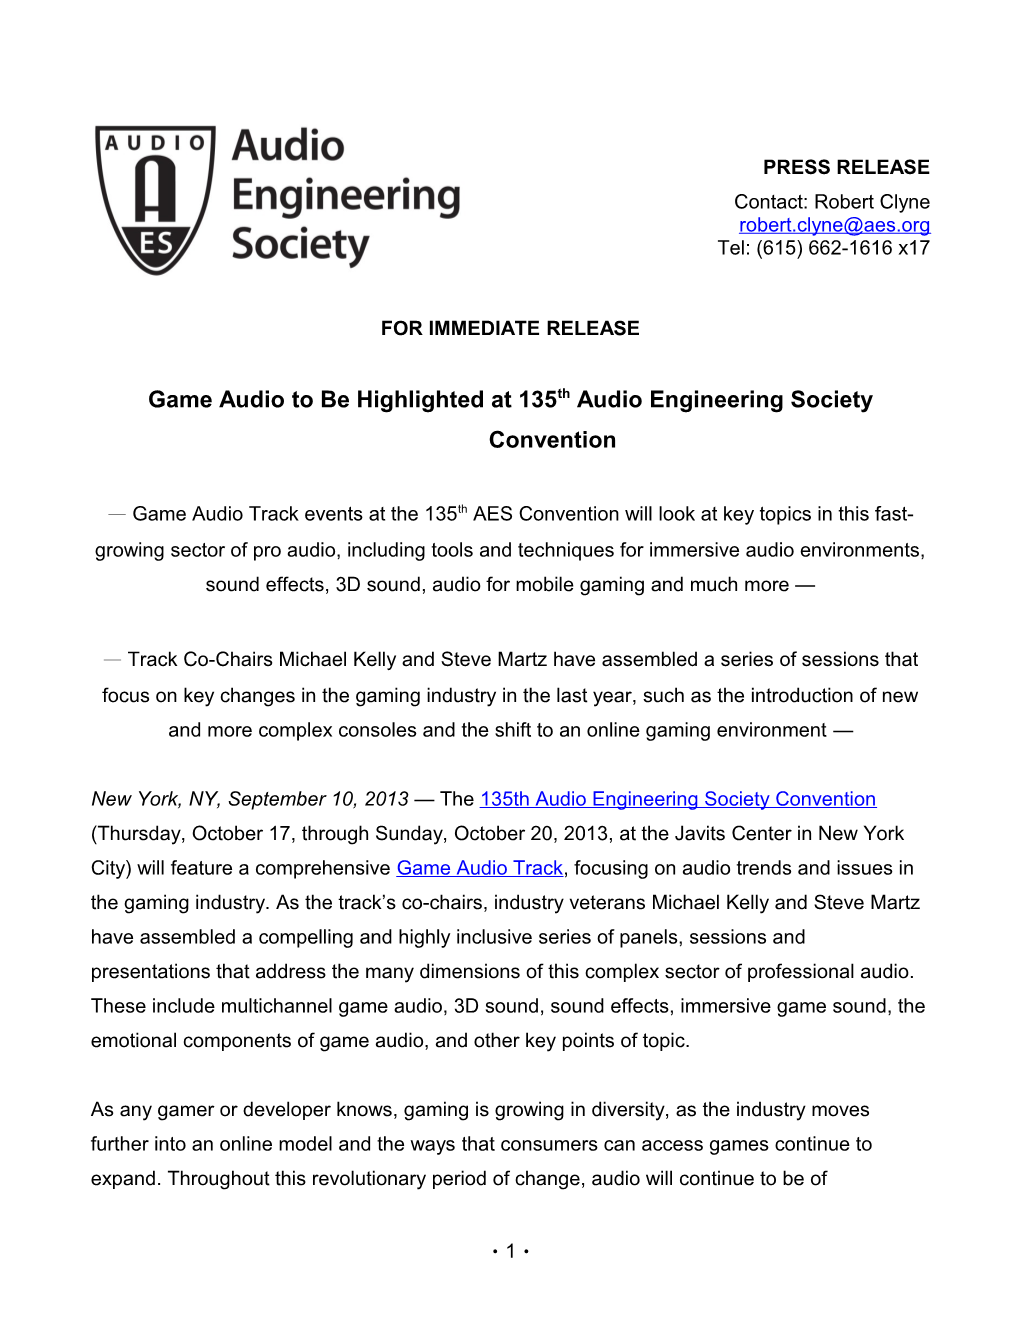 Game Audio to Be Highlighted at 135Th Audio Engineering Society Convention